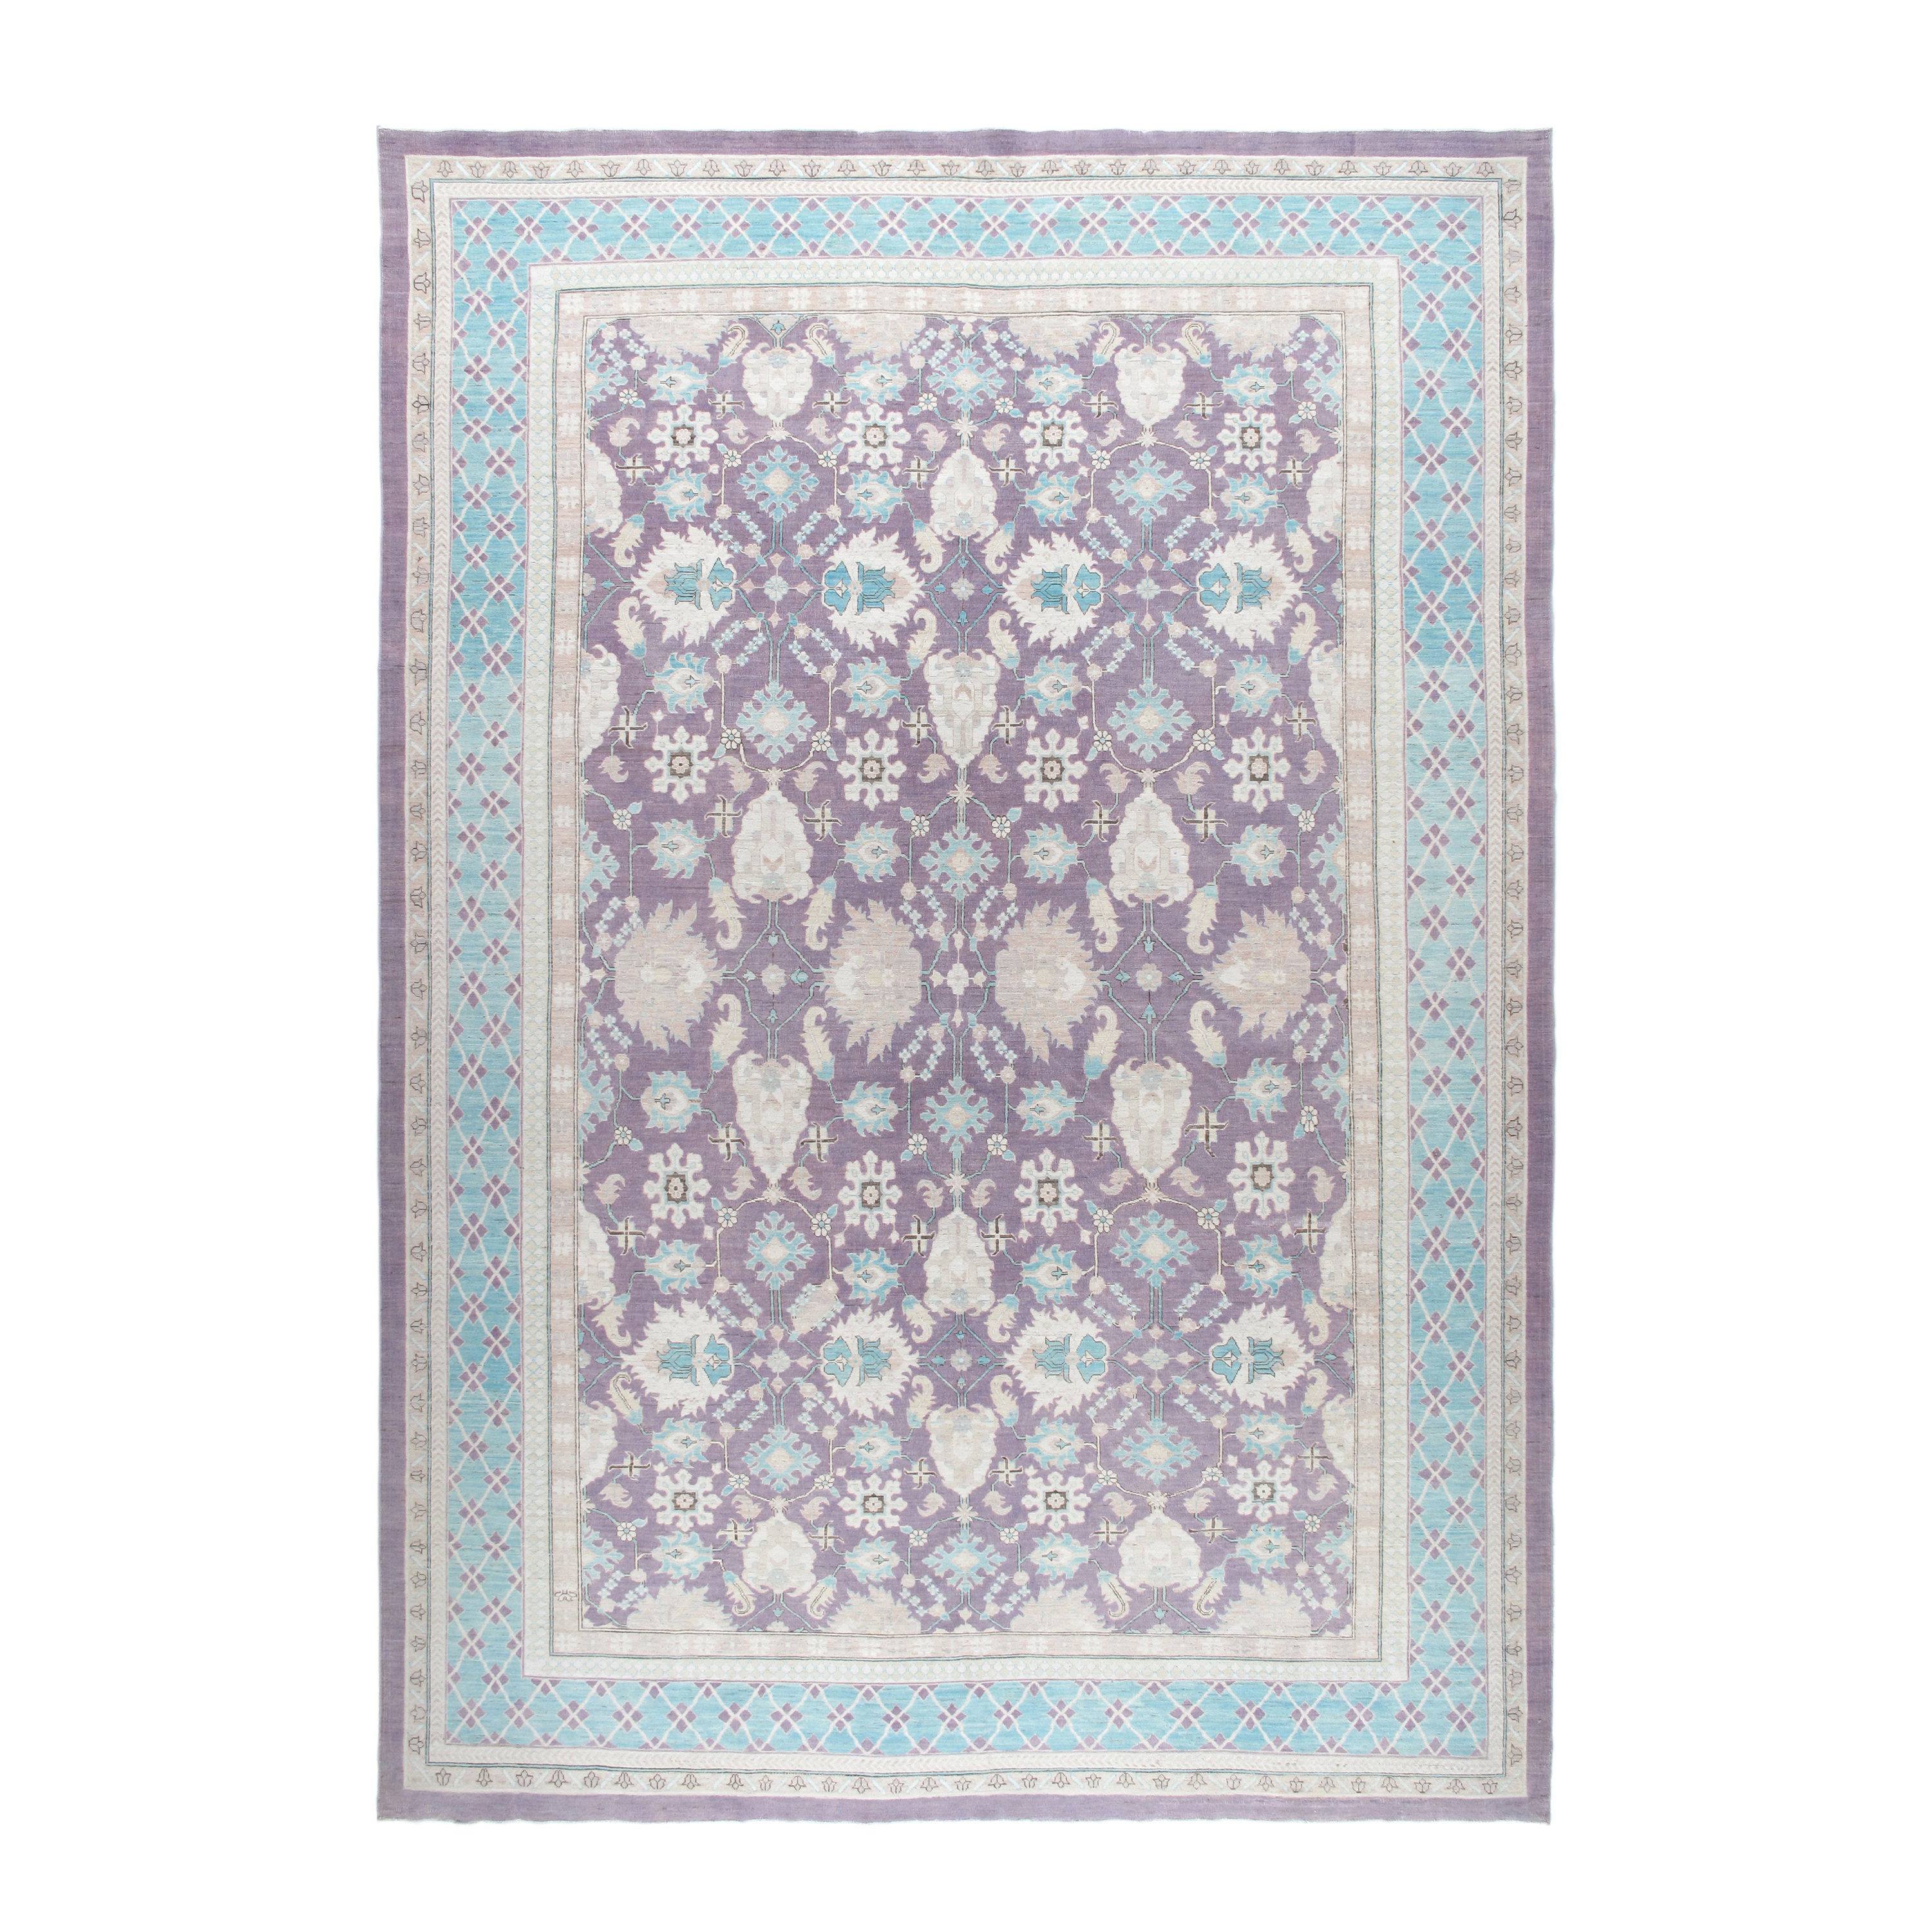 Agra is a hand-knotted rug with a traditional design and made of 100% wool.